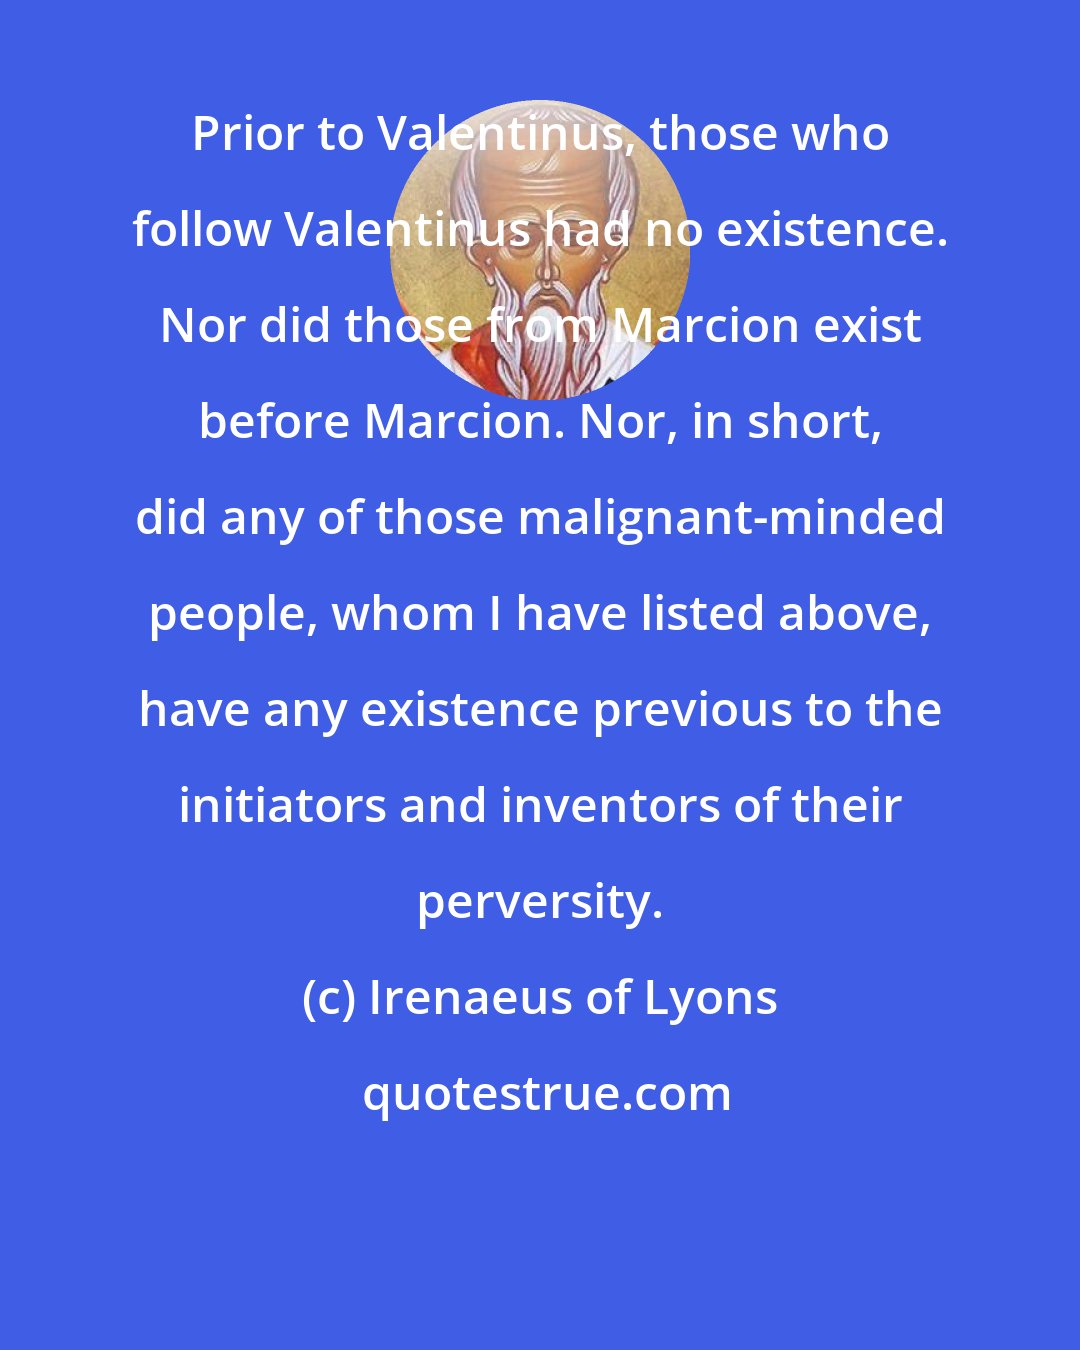 Irenaeus of Lyons: Prior to Valentinus, those who follow Valentinus had no existence. Nor did those from Marcion exist before Marcion. Nor, in short, did any of those malignant-minded people, whom I have listed above, have any existence previous to the initiators and inventors of their perversity.